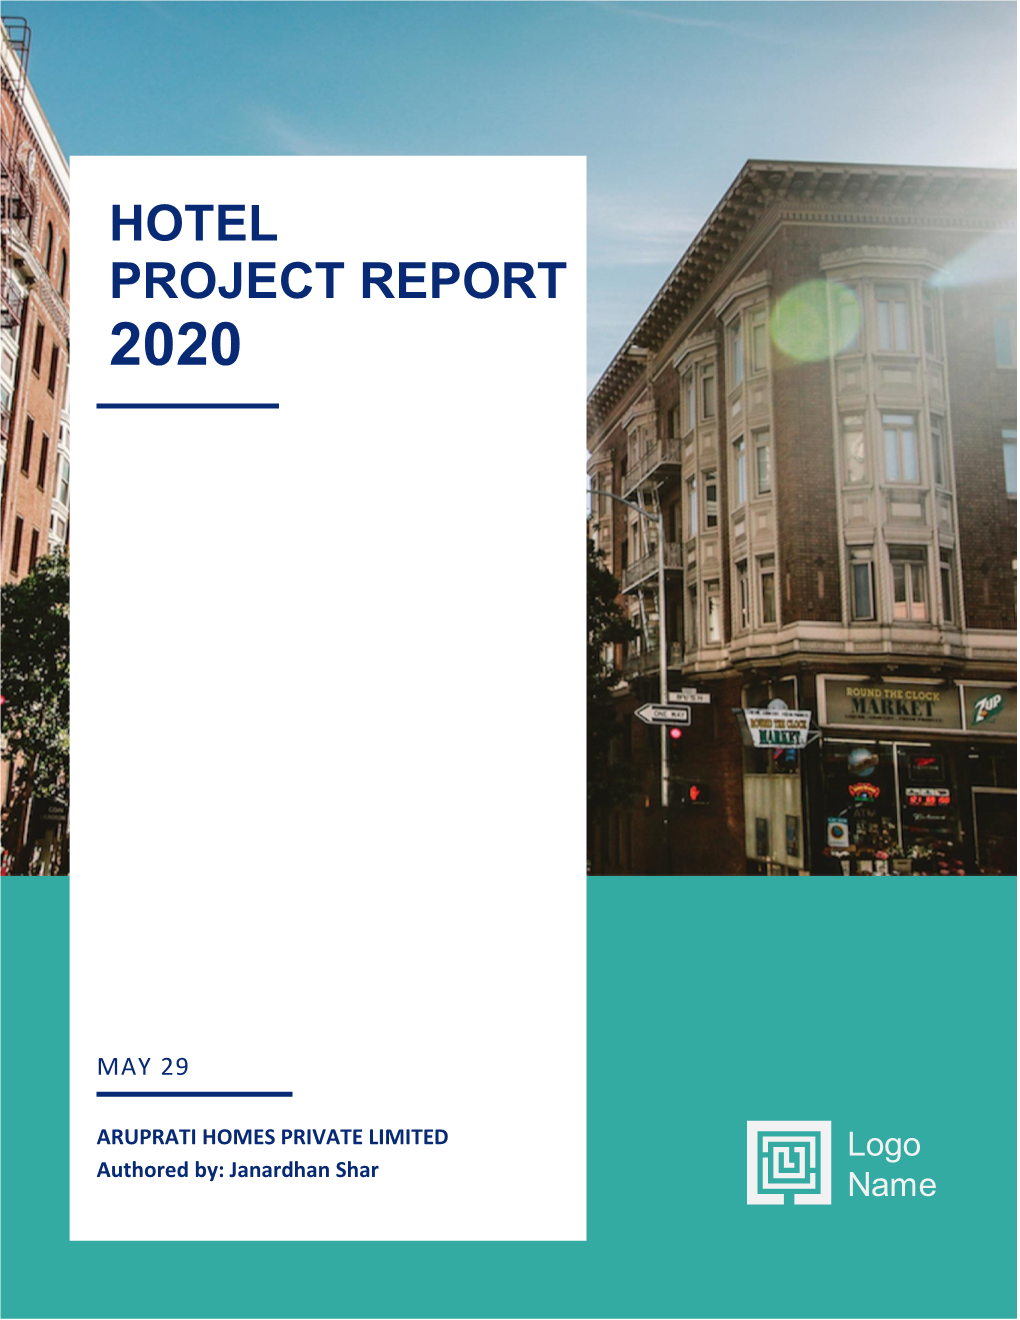 Project Report 2020